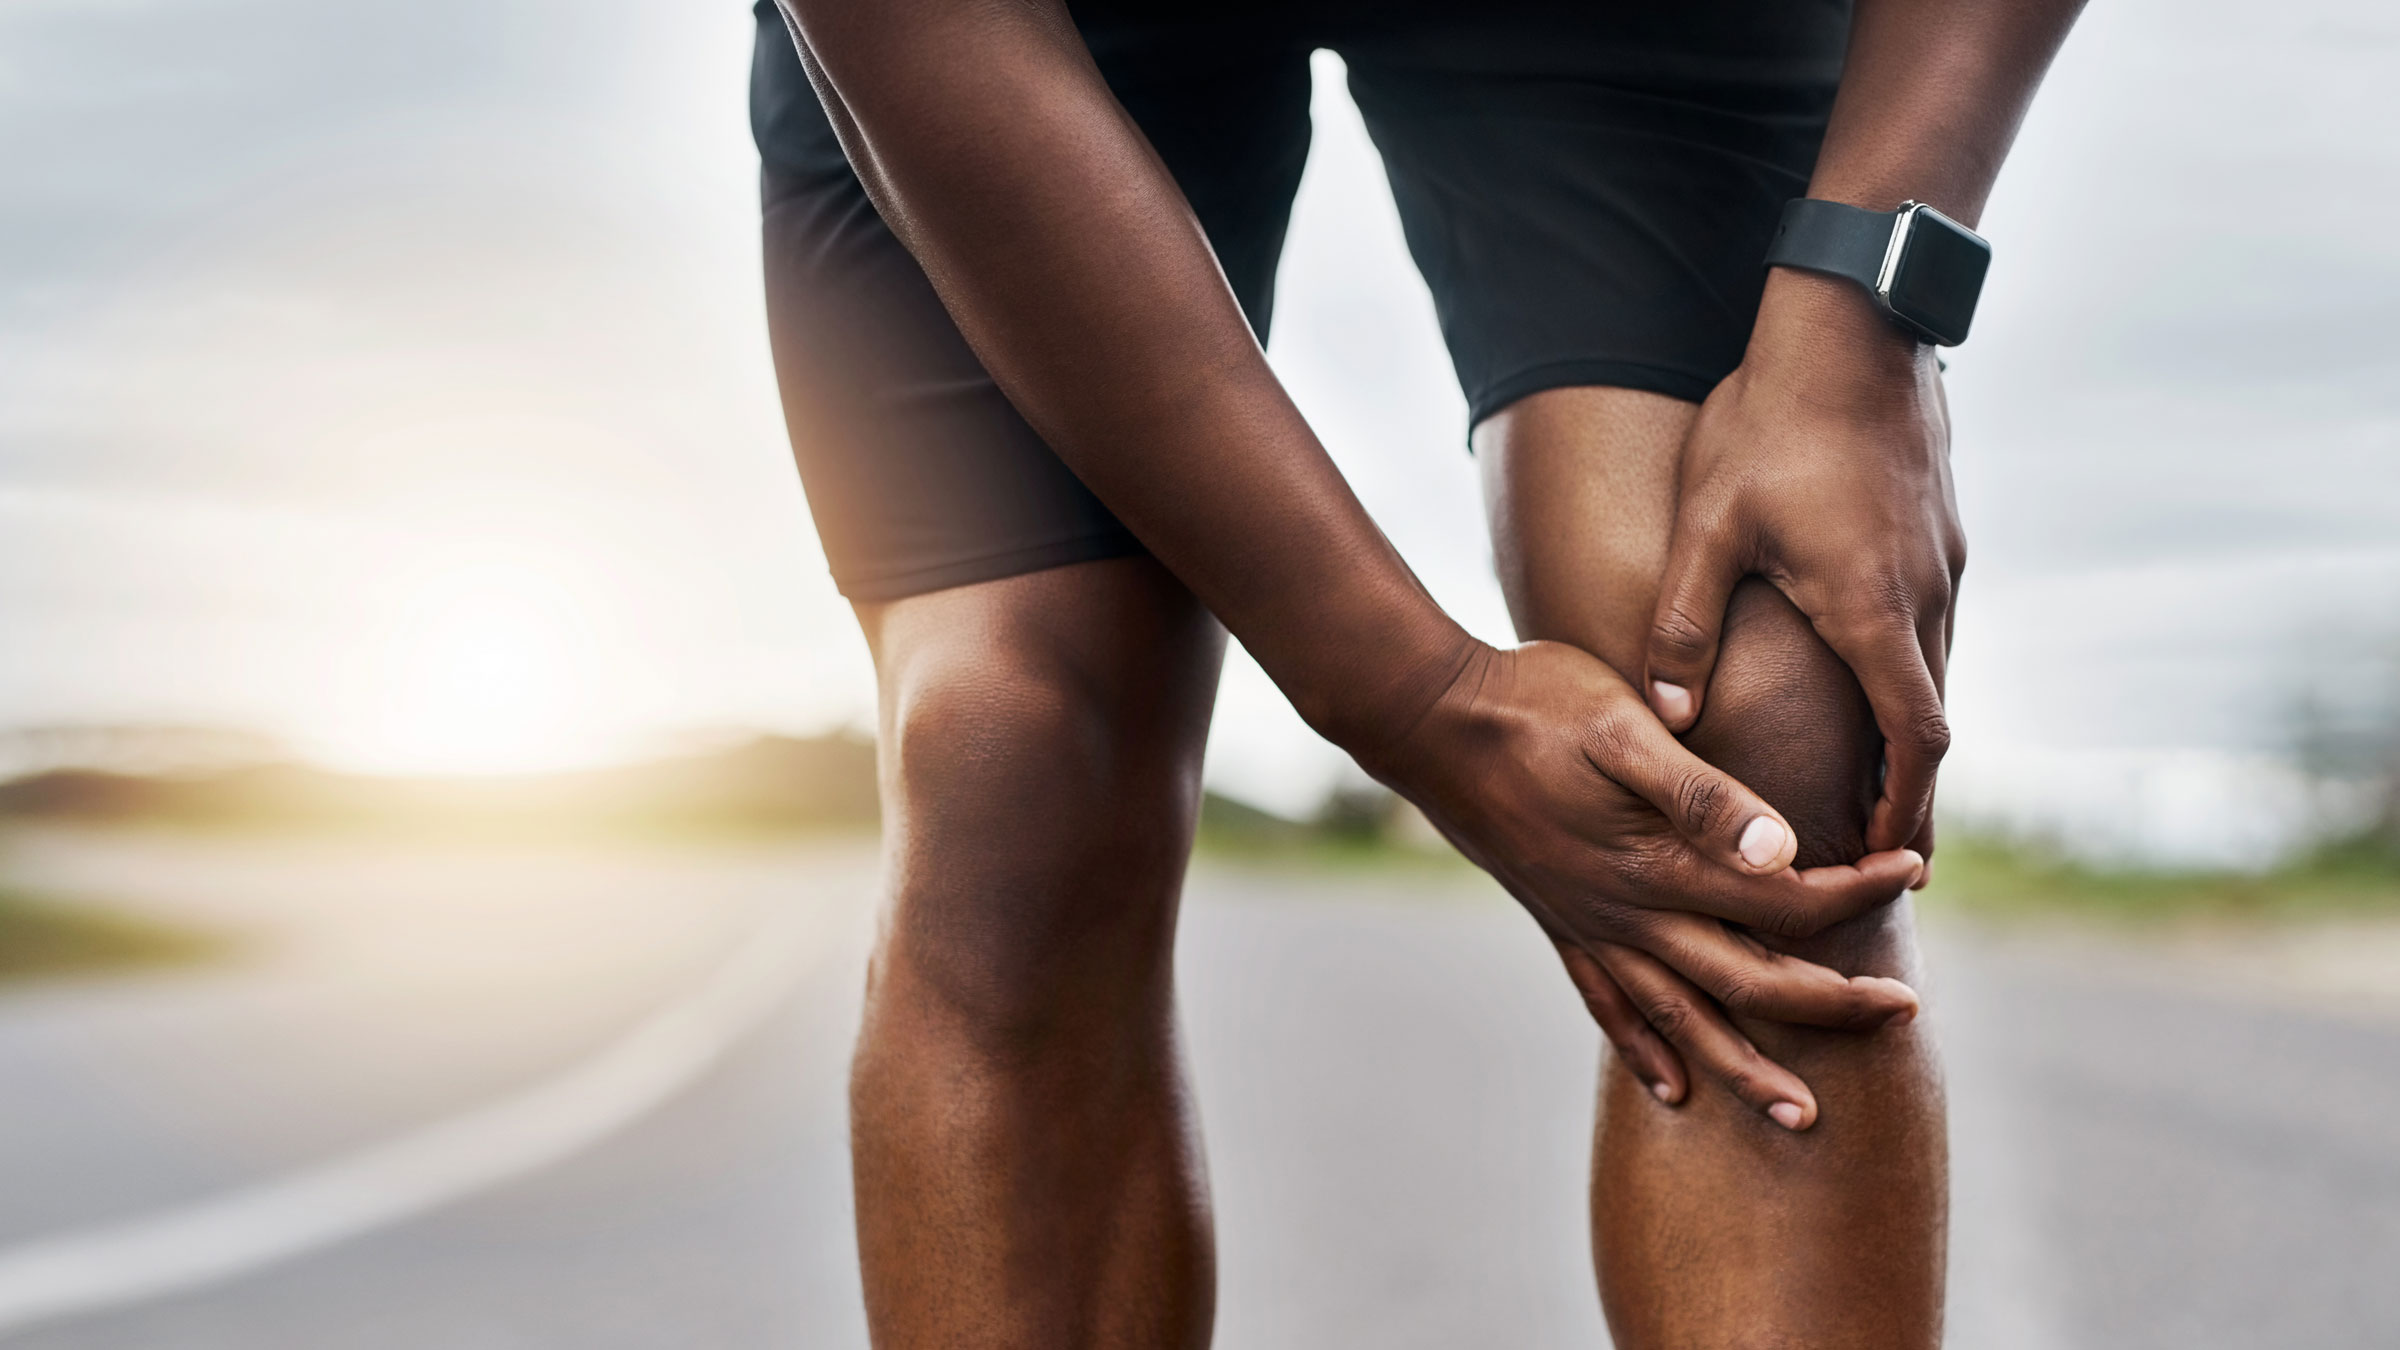 Ongoing calf pain in New York City is common in runners and other athletes,  but we can get to the bottom of the issue - Dynamic Sports Physical Therapy